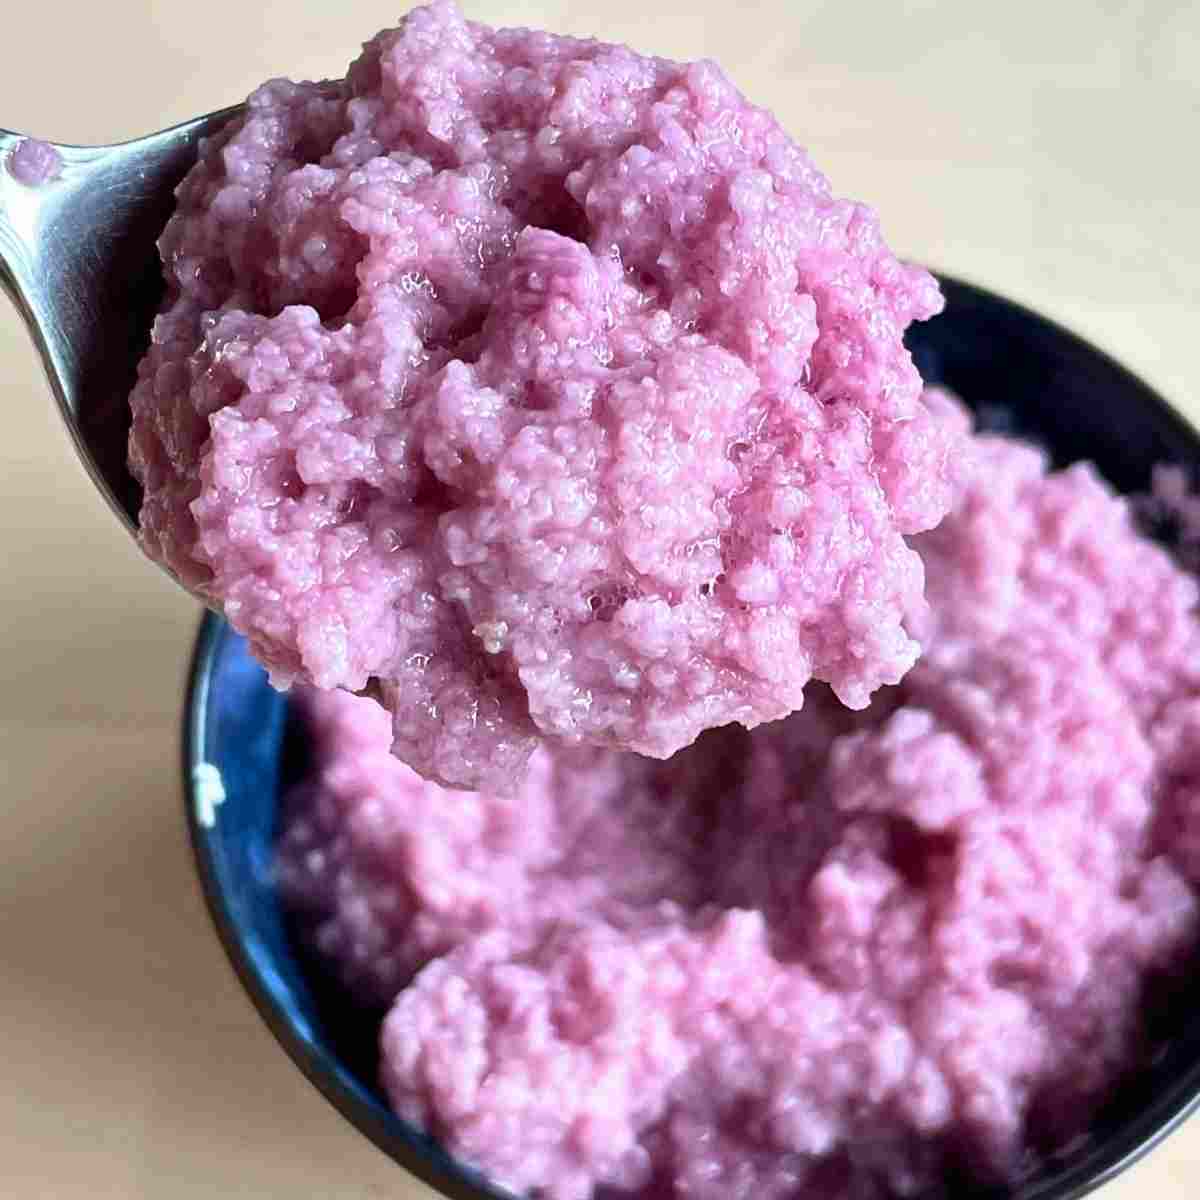 Defrosted grated ube